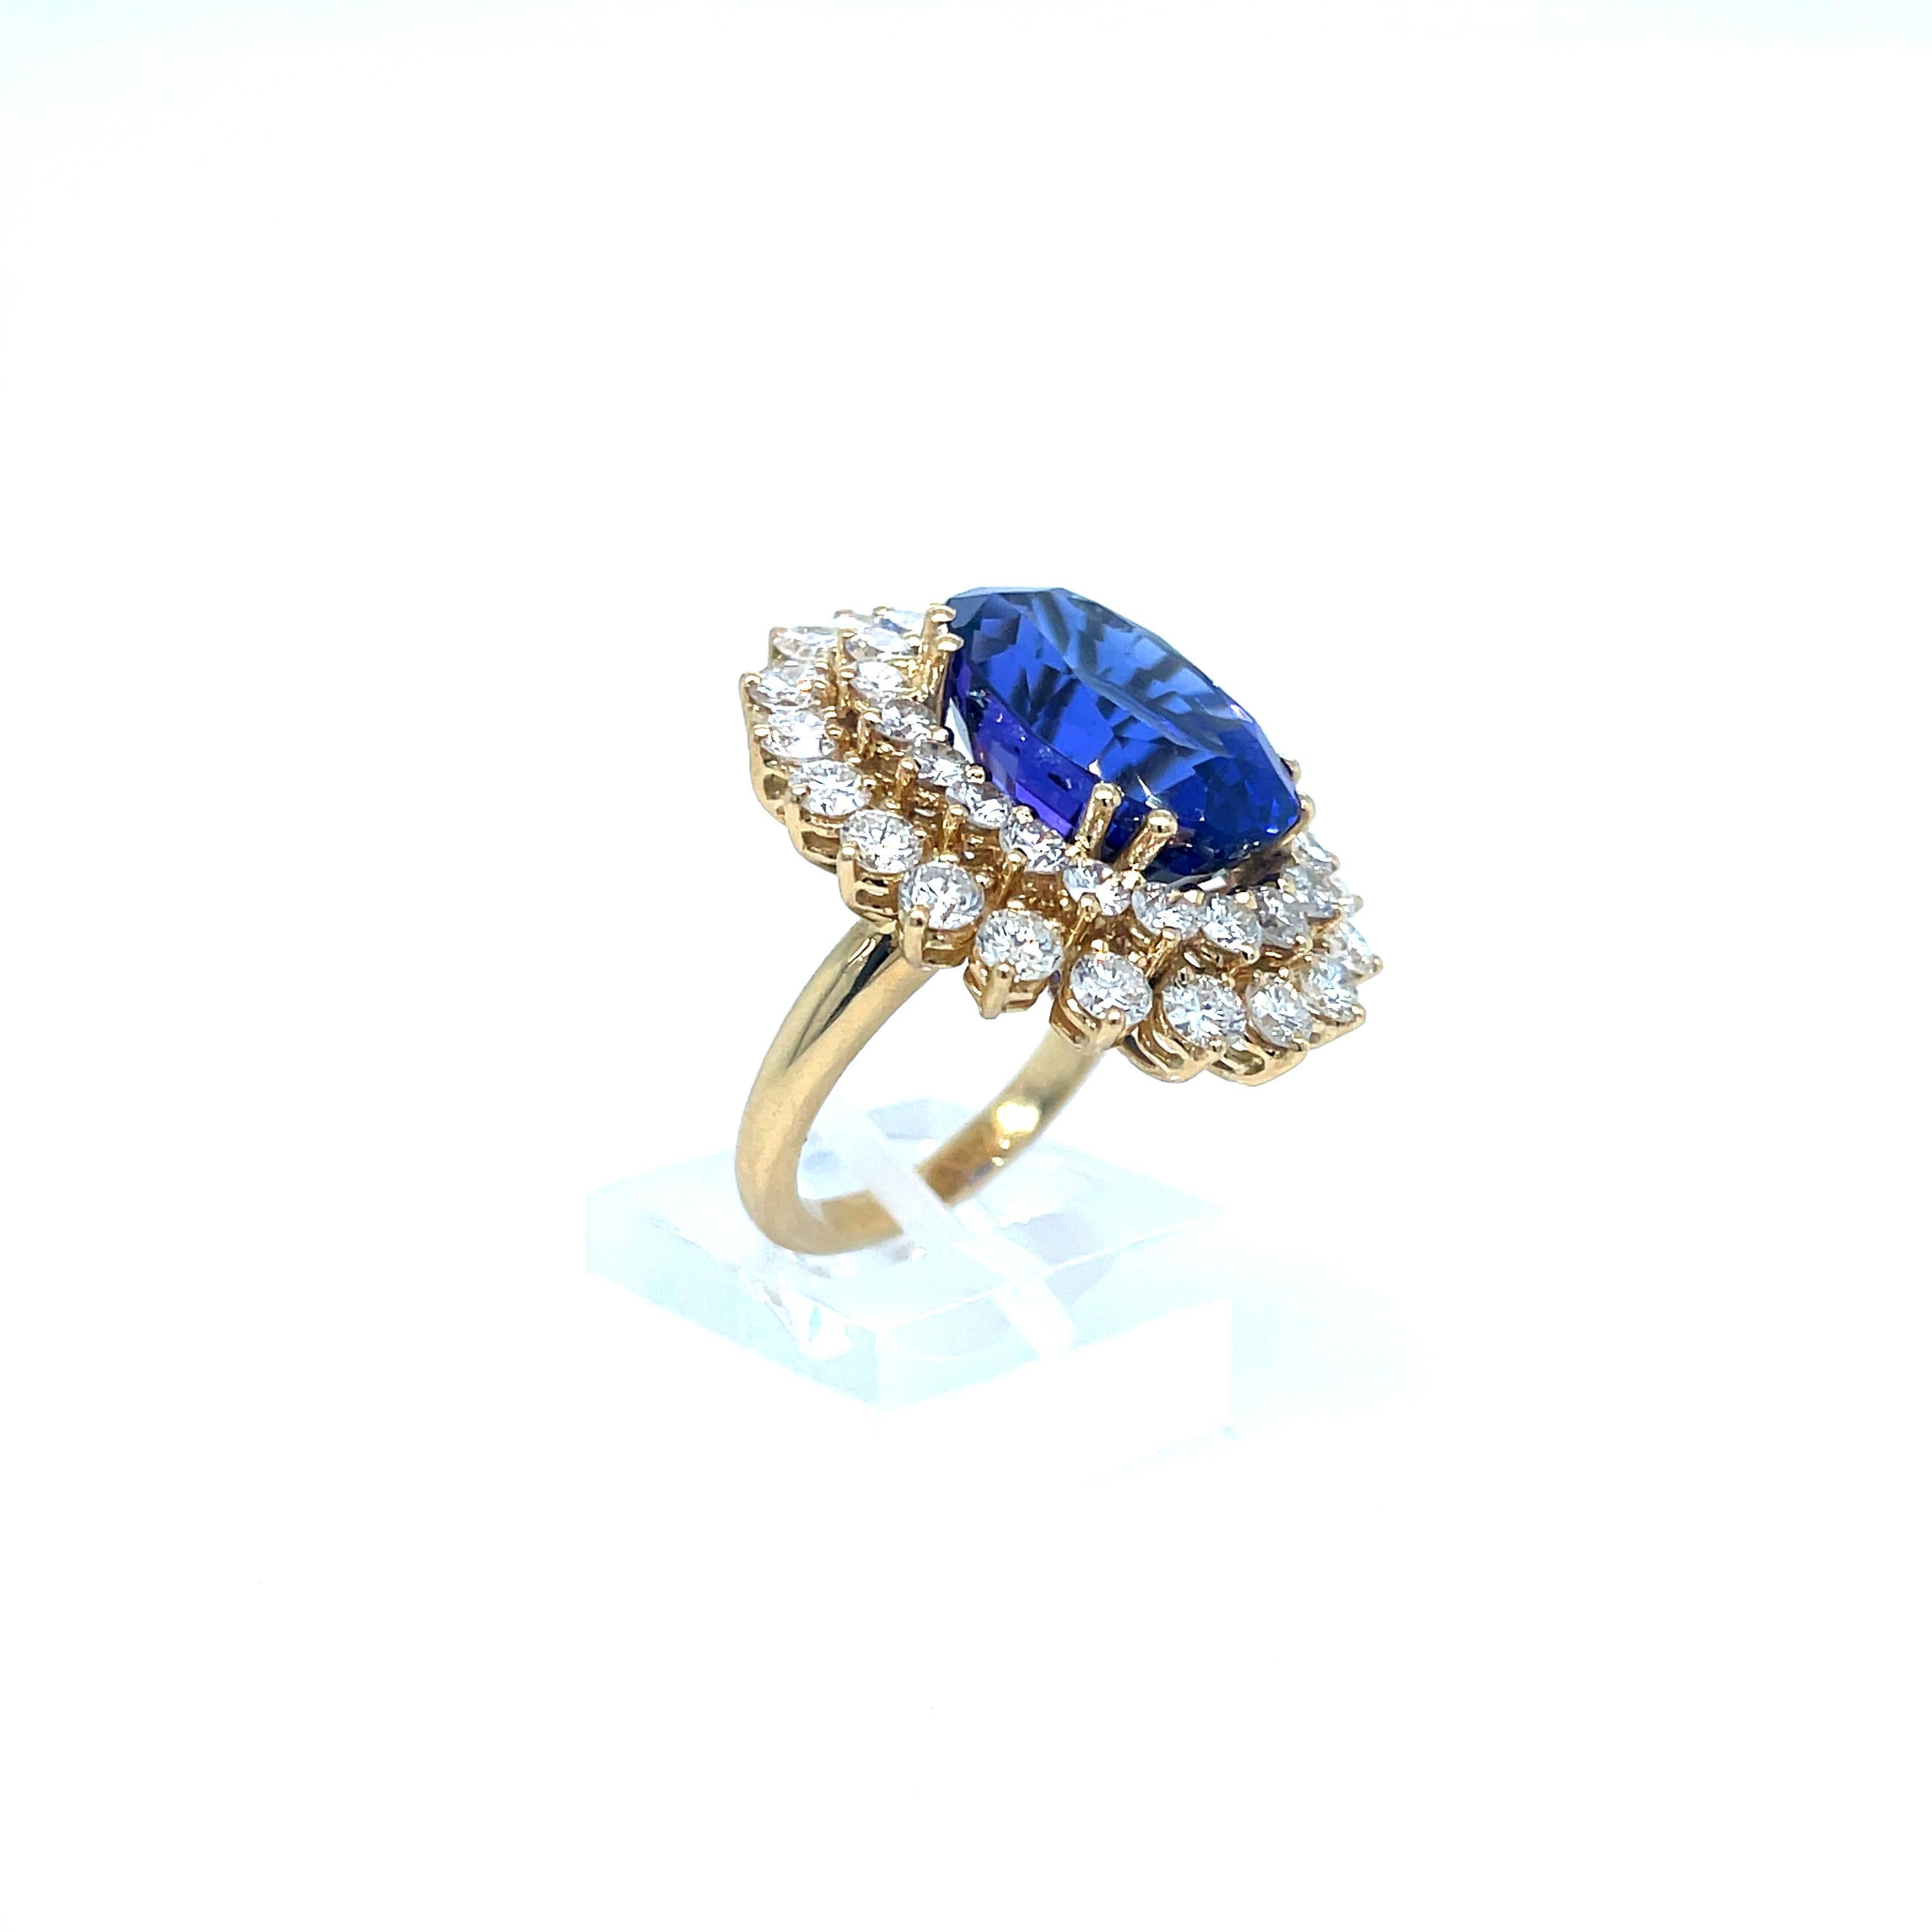 Tanzanite and Diamond Ring in 18K Yellow Gold. The ring features an 11ct oval tanzanite surrounded by a double halo of diamonds (4ctw). Finger size 6, can be sized.

Ring 1.125